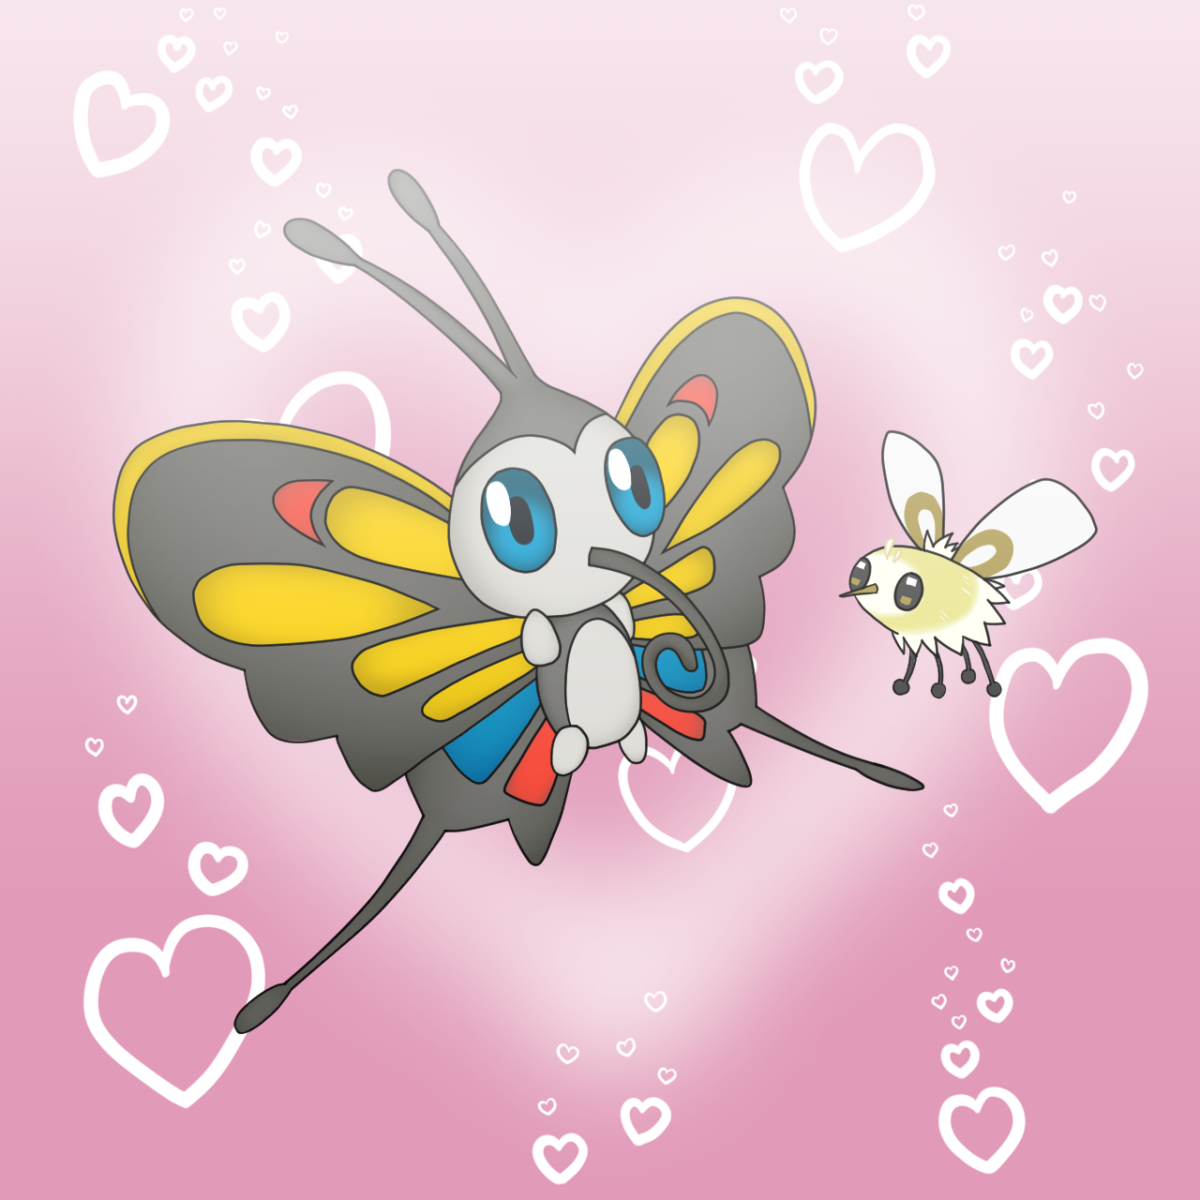 Beautifly and Cutiefly by CyaniDairySentinel on DeviantArt